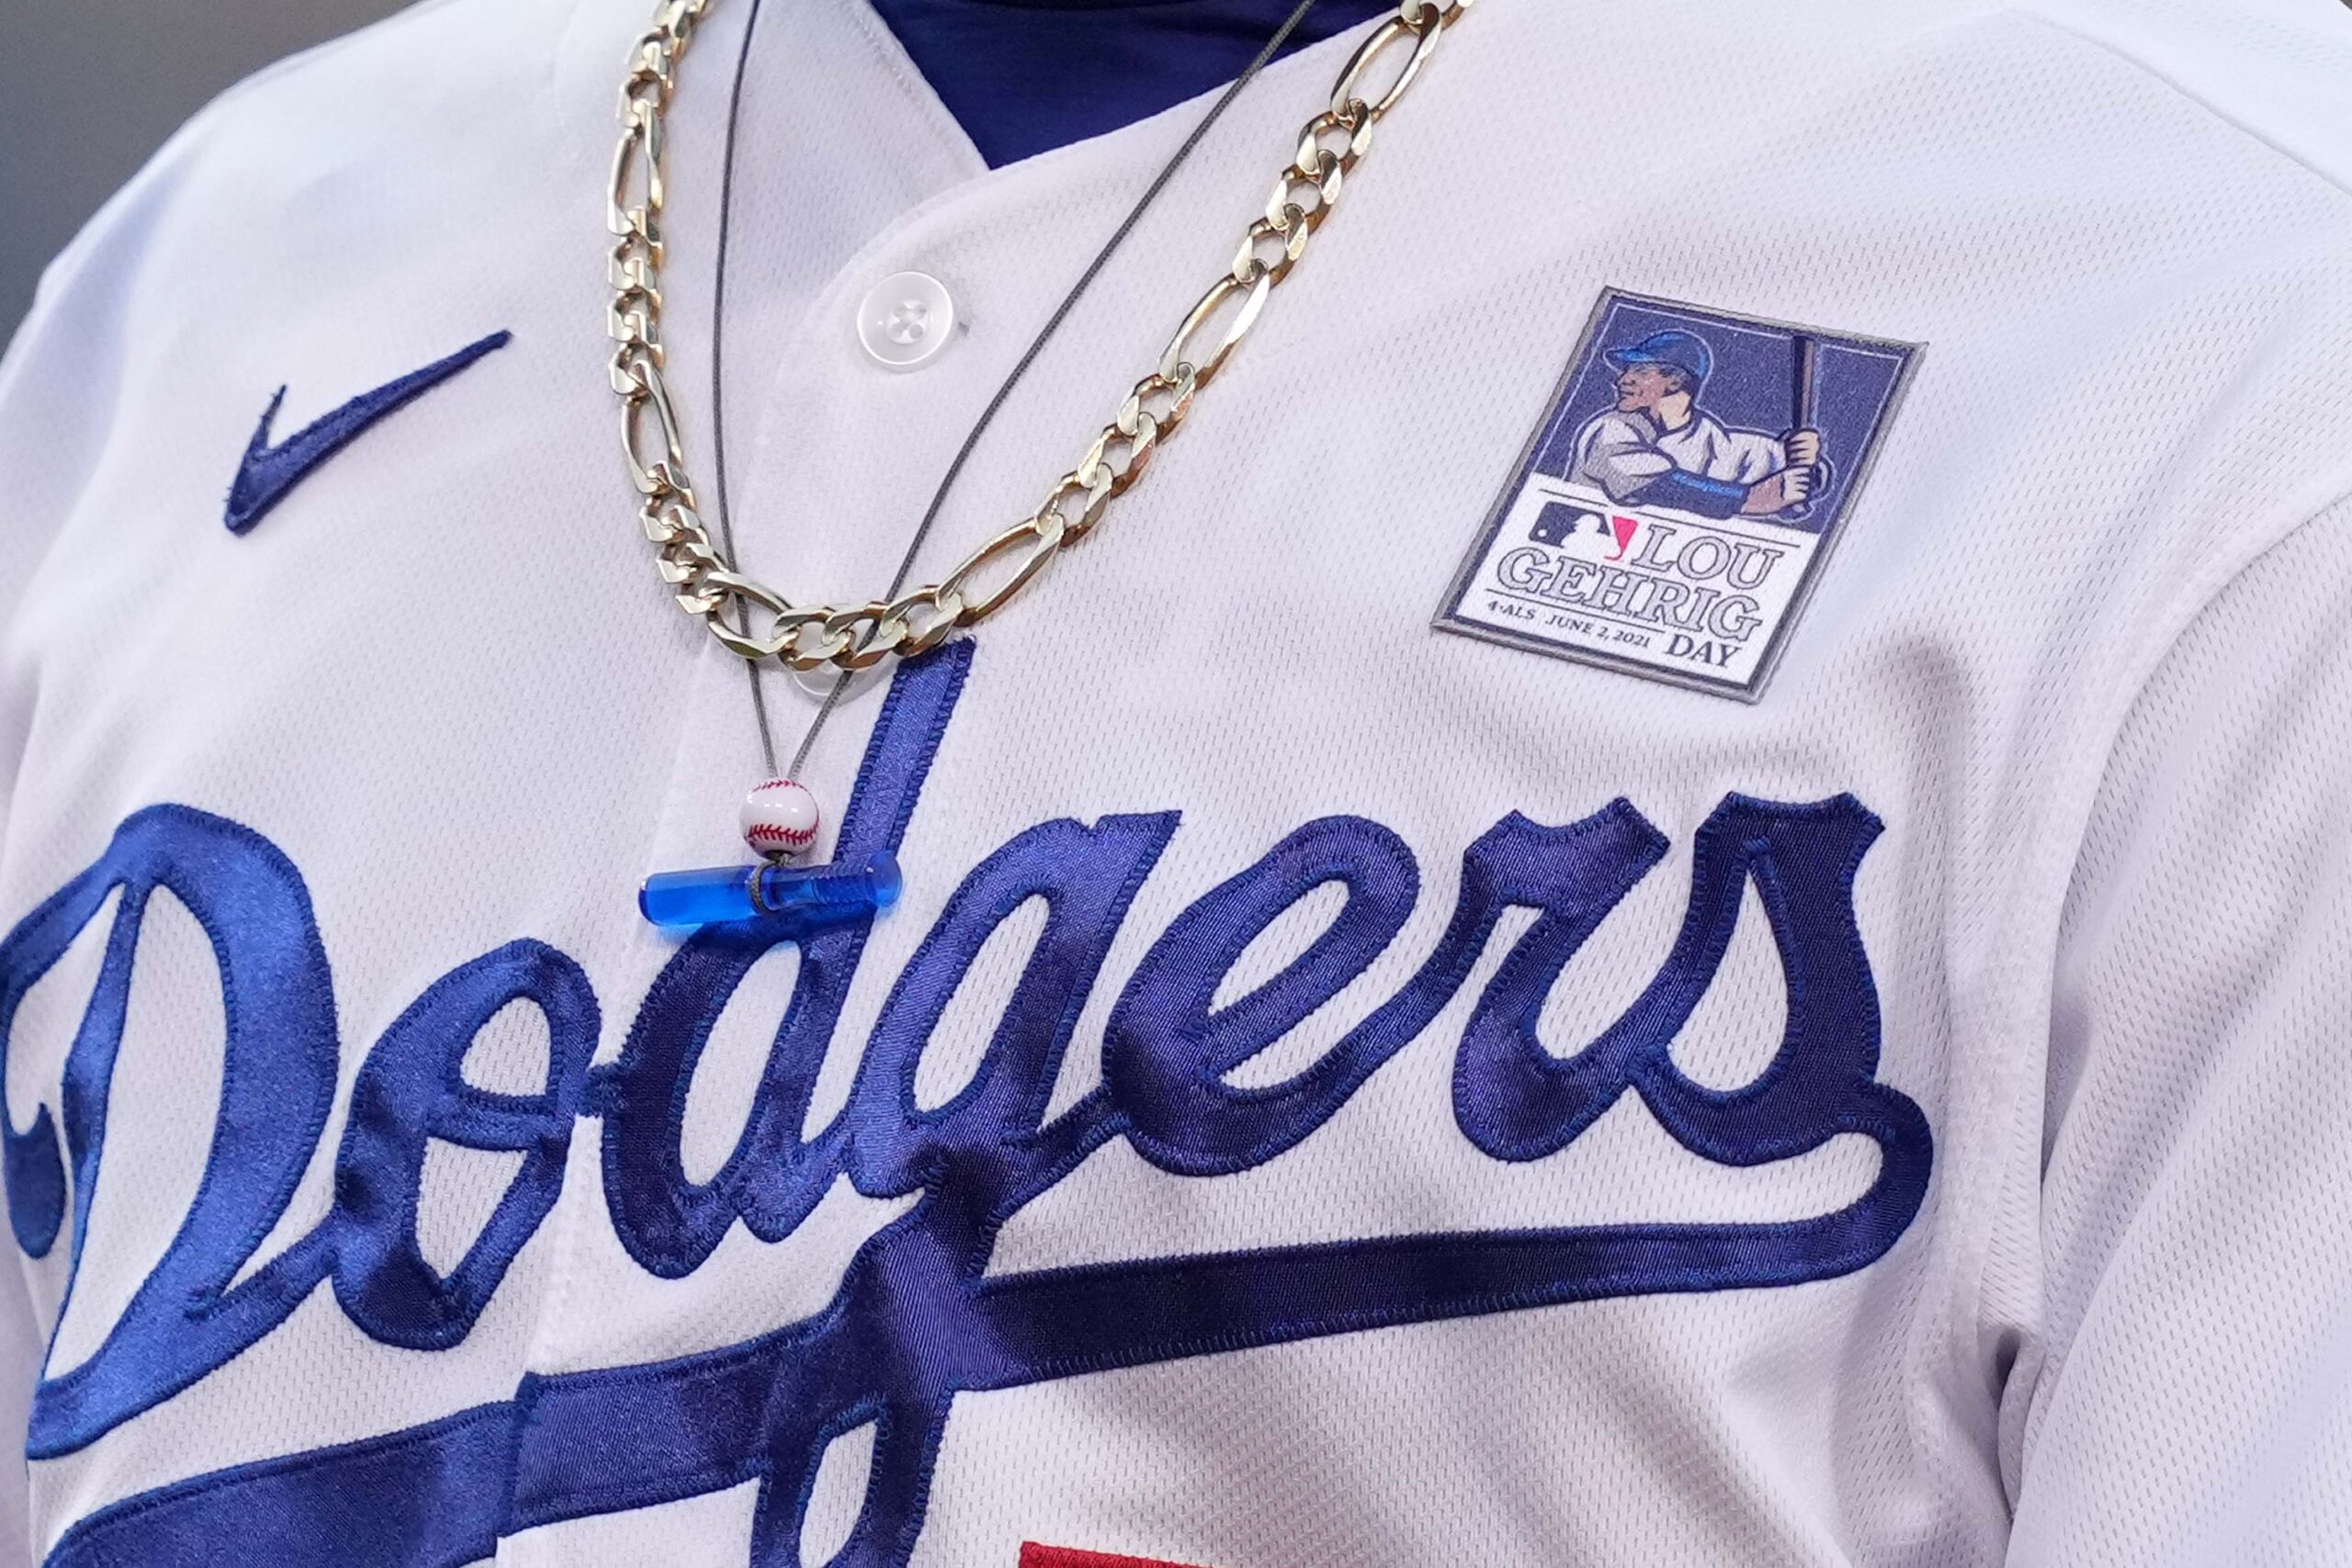 dodgers jersey patches